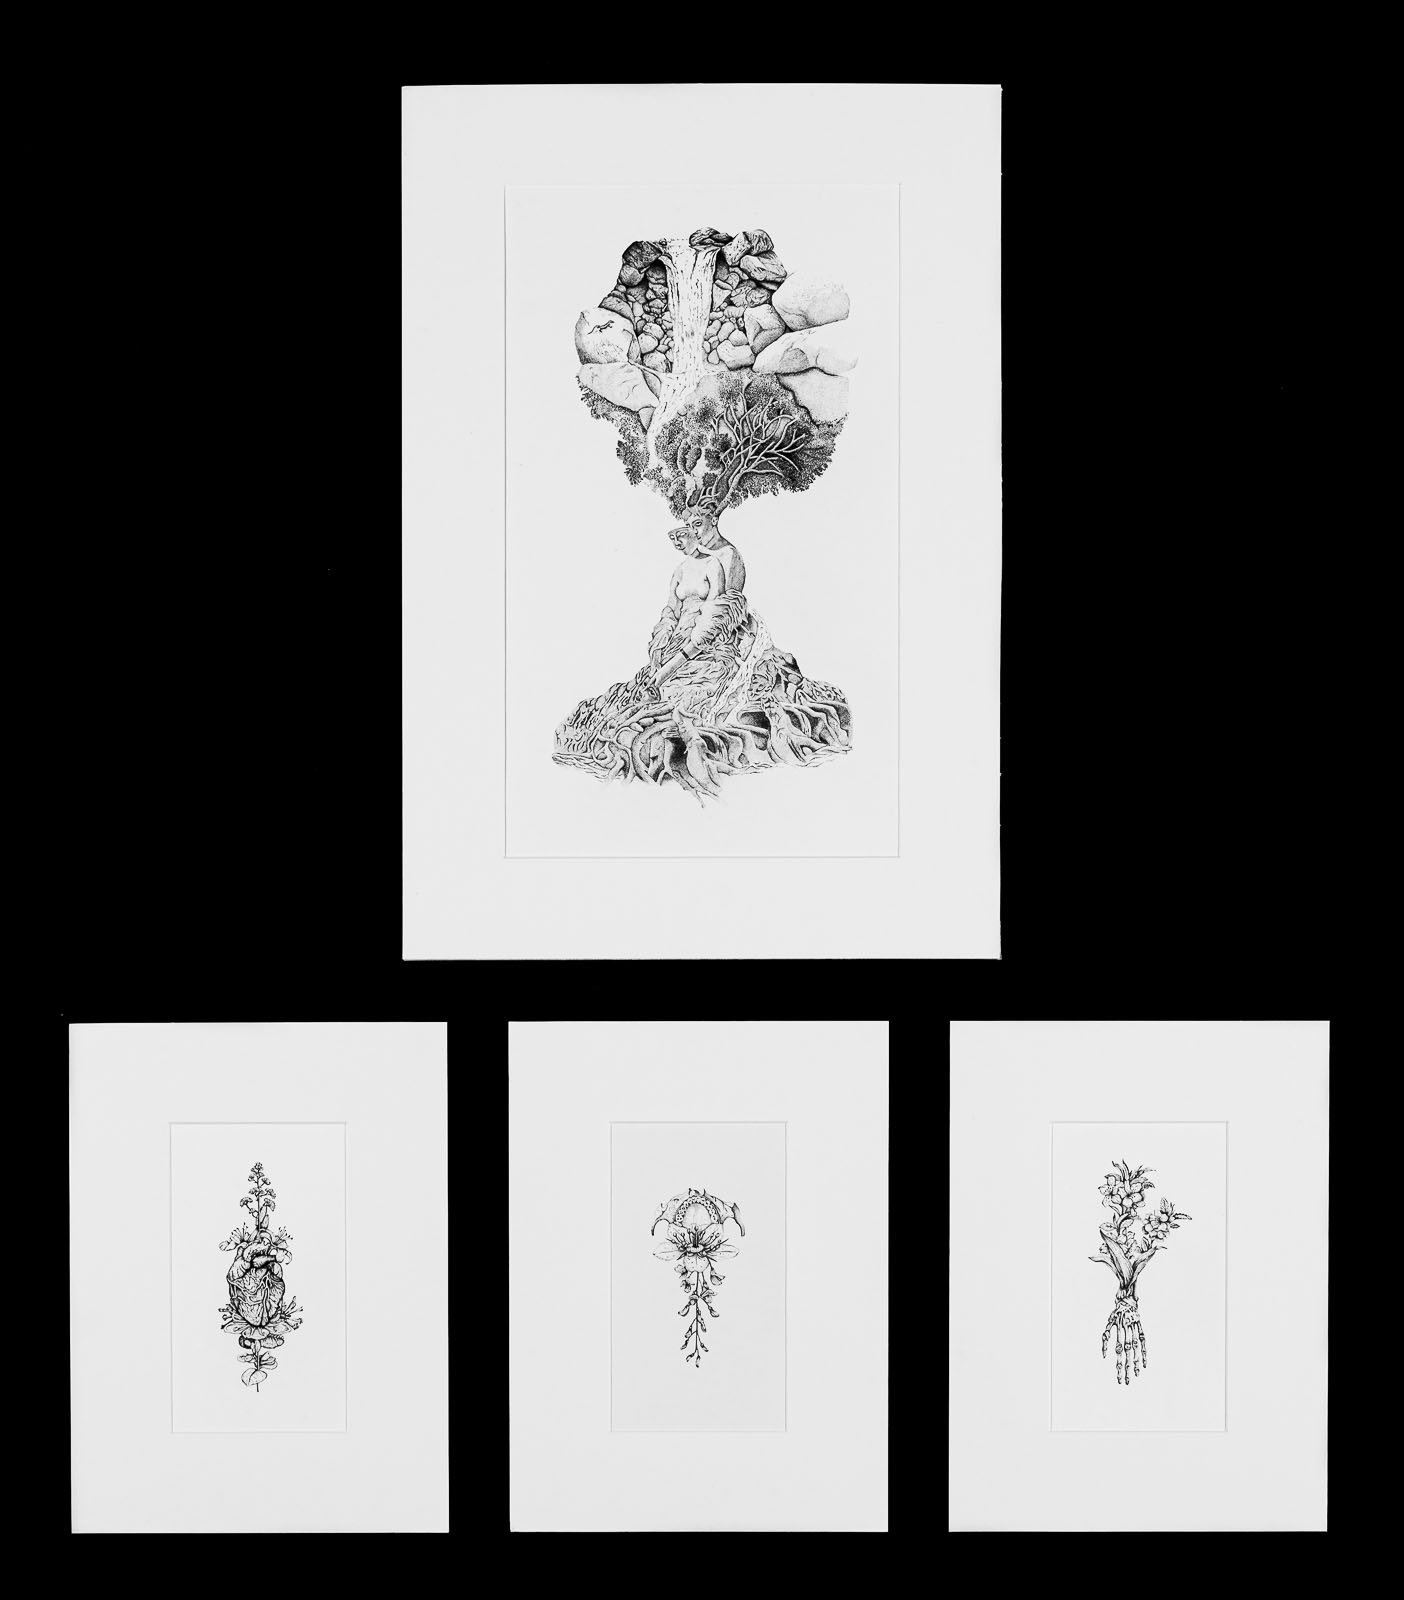 Four pen drawings that combine elements of the human figure with natural forms like rocks, branches and foliage.